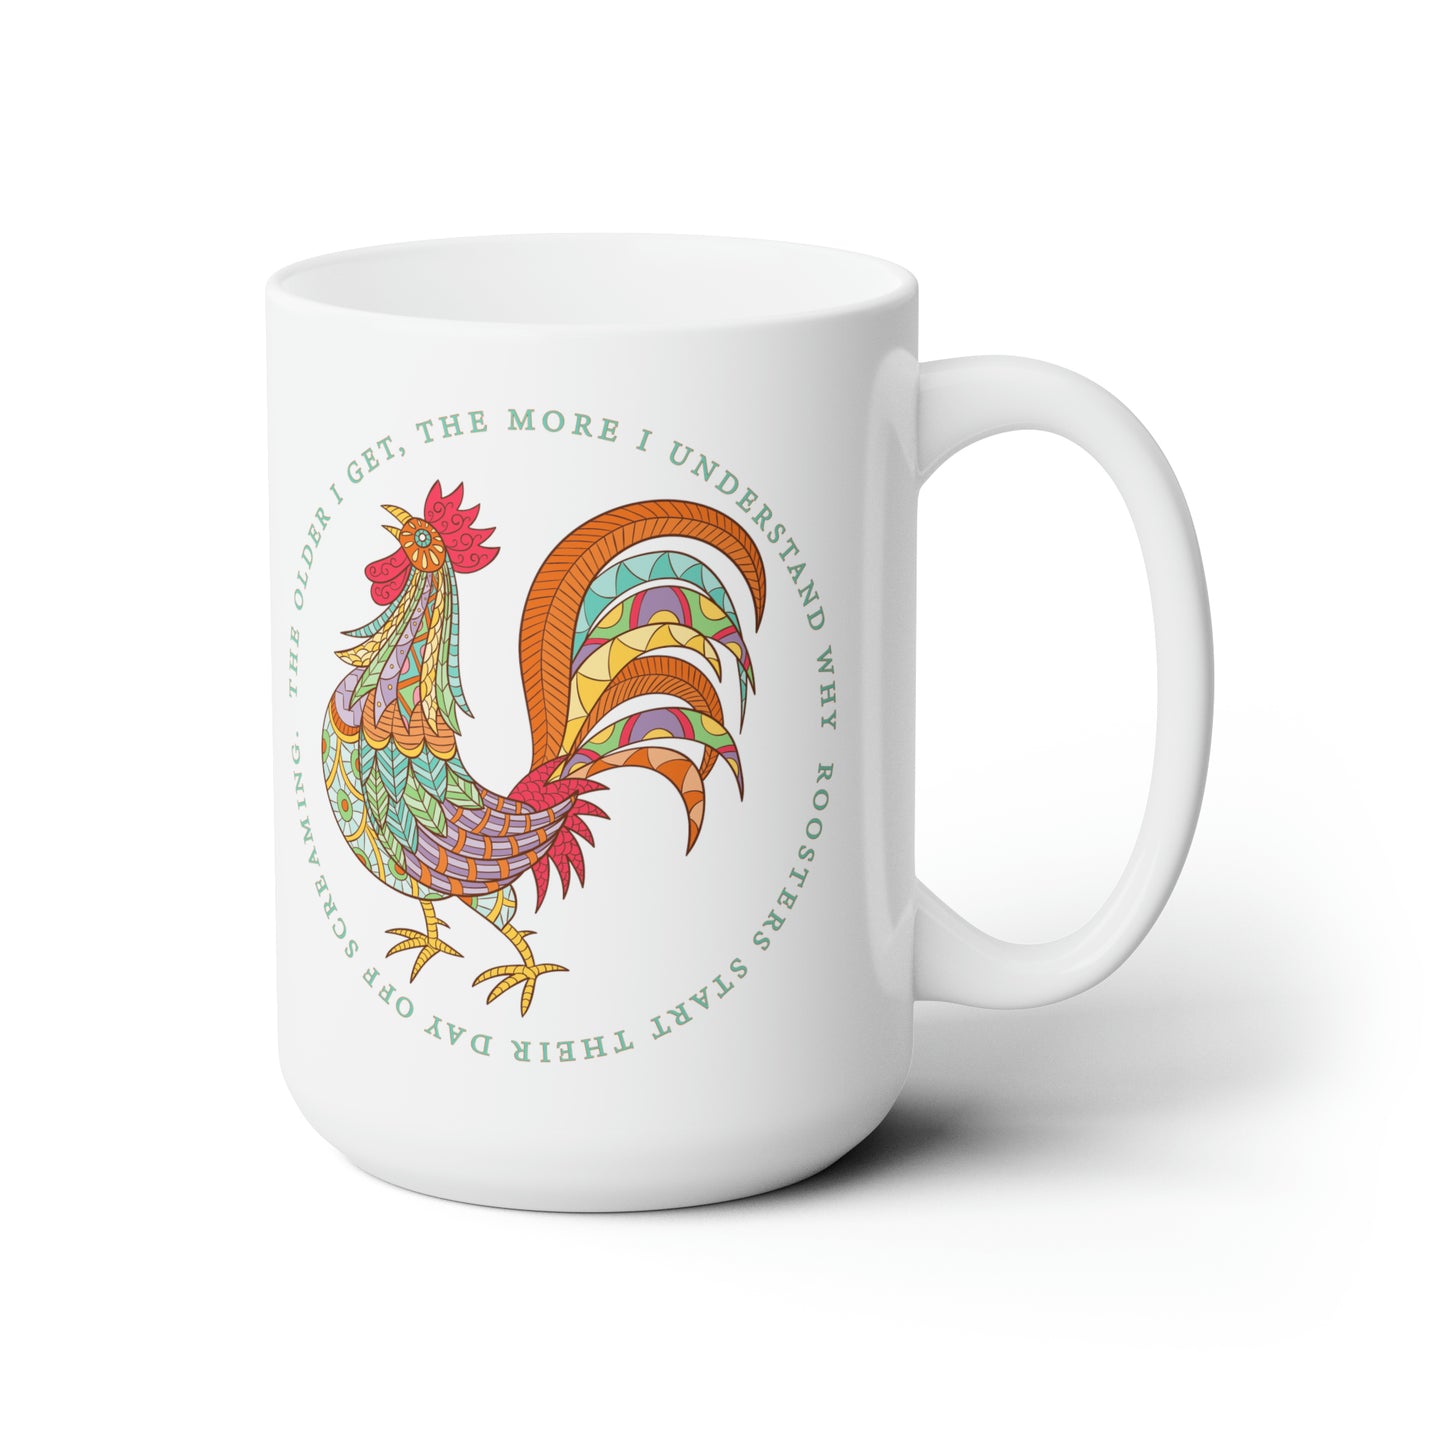 Funny Rooster Coffee Mug For Hot Tea Cup For Sarcastic Aging Quote Gift Idea